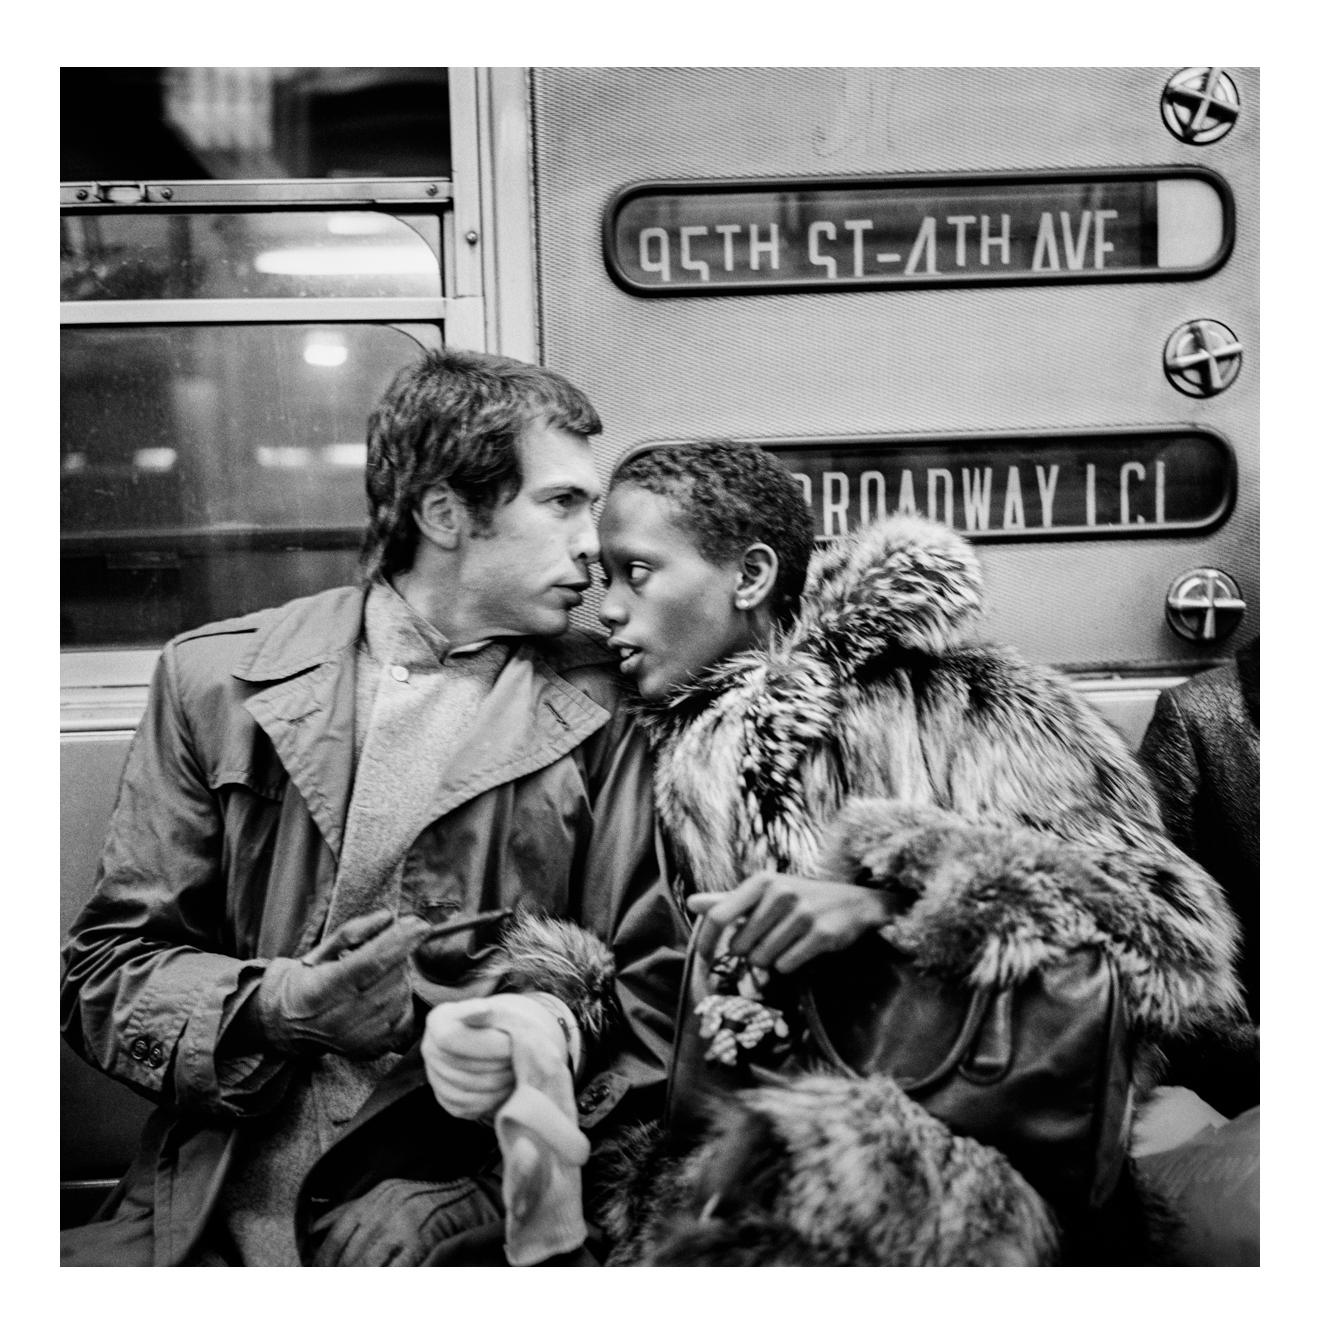 Jean-Paul Goude & Toukie Smith in NYC Subway, 1976 - Contemporary Photograph by Jonathan Becker